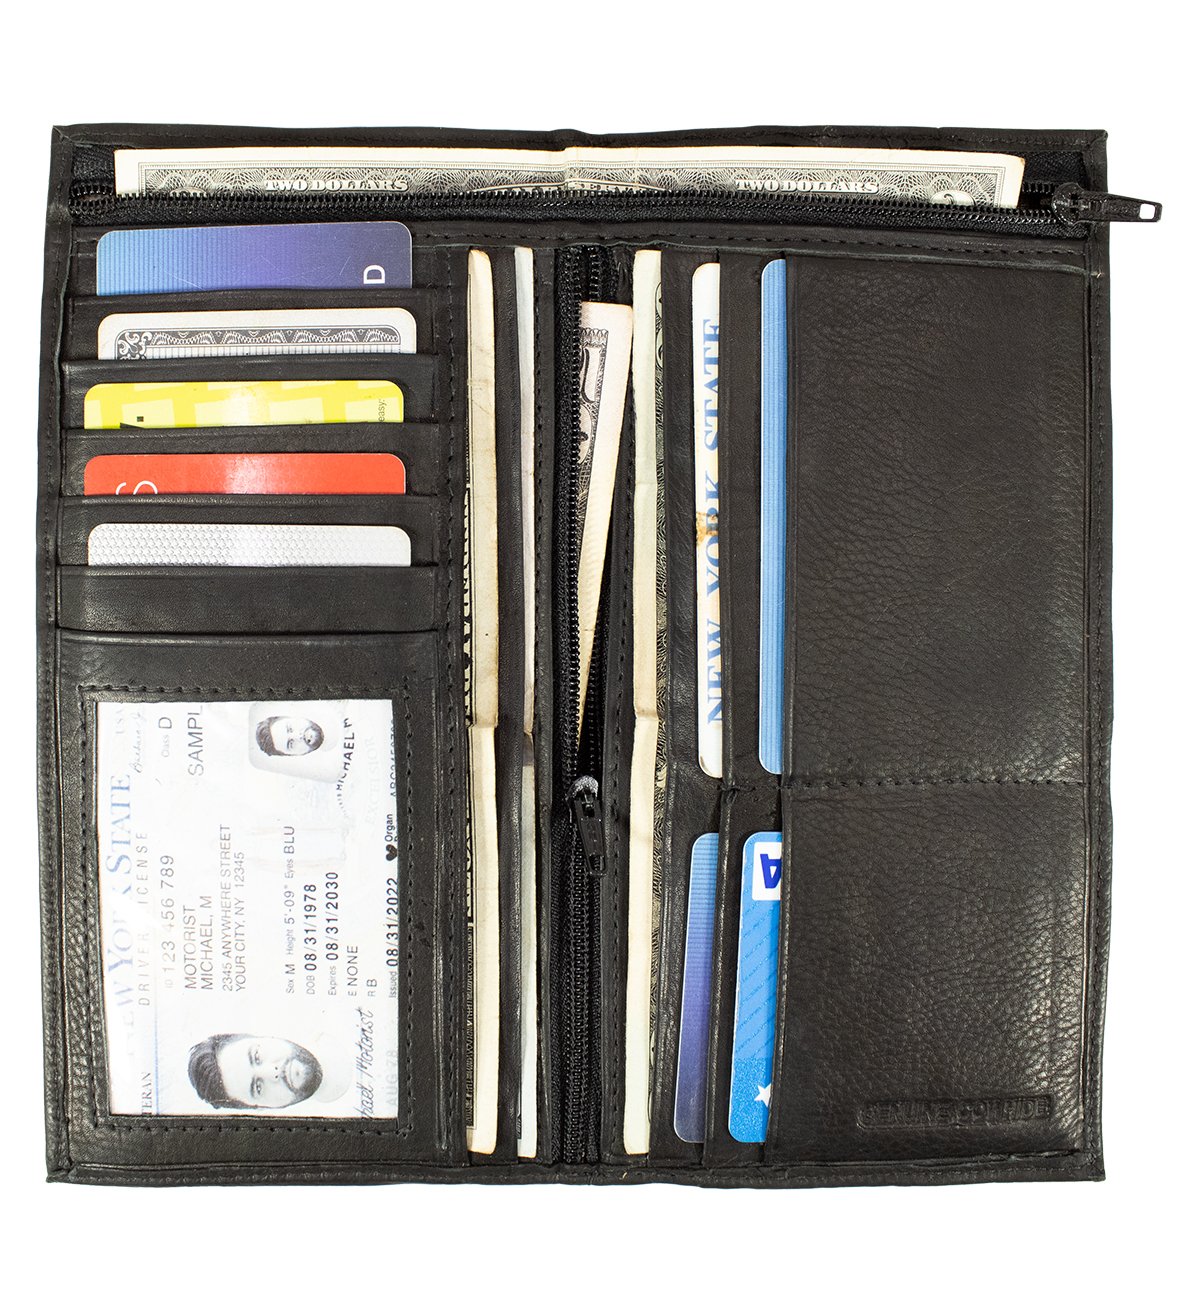 Checkbook Cover With Extra Card Slots - #CBC-553